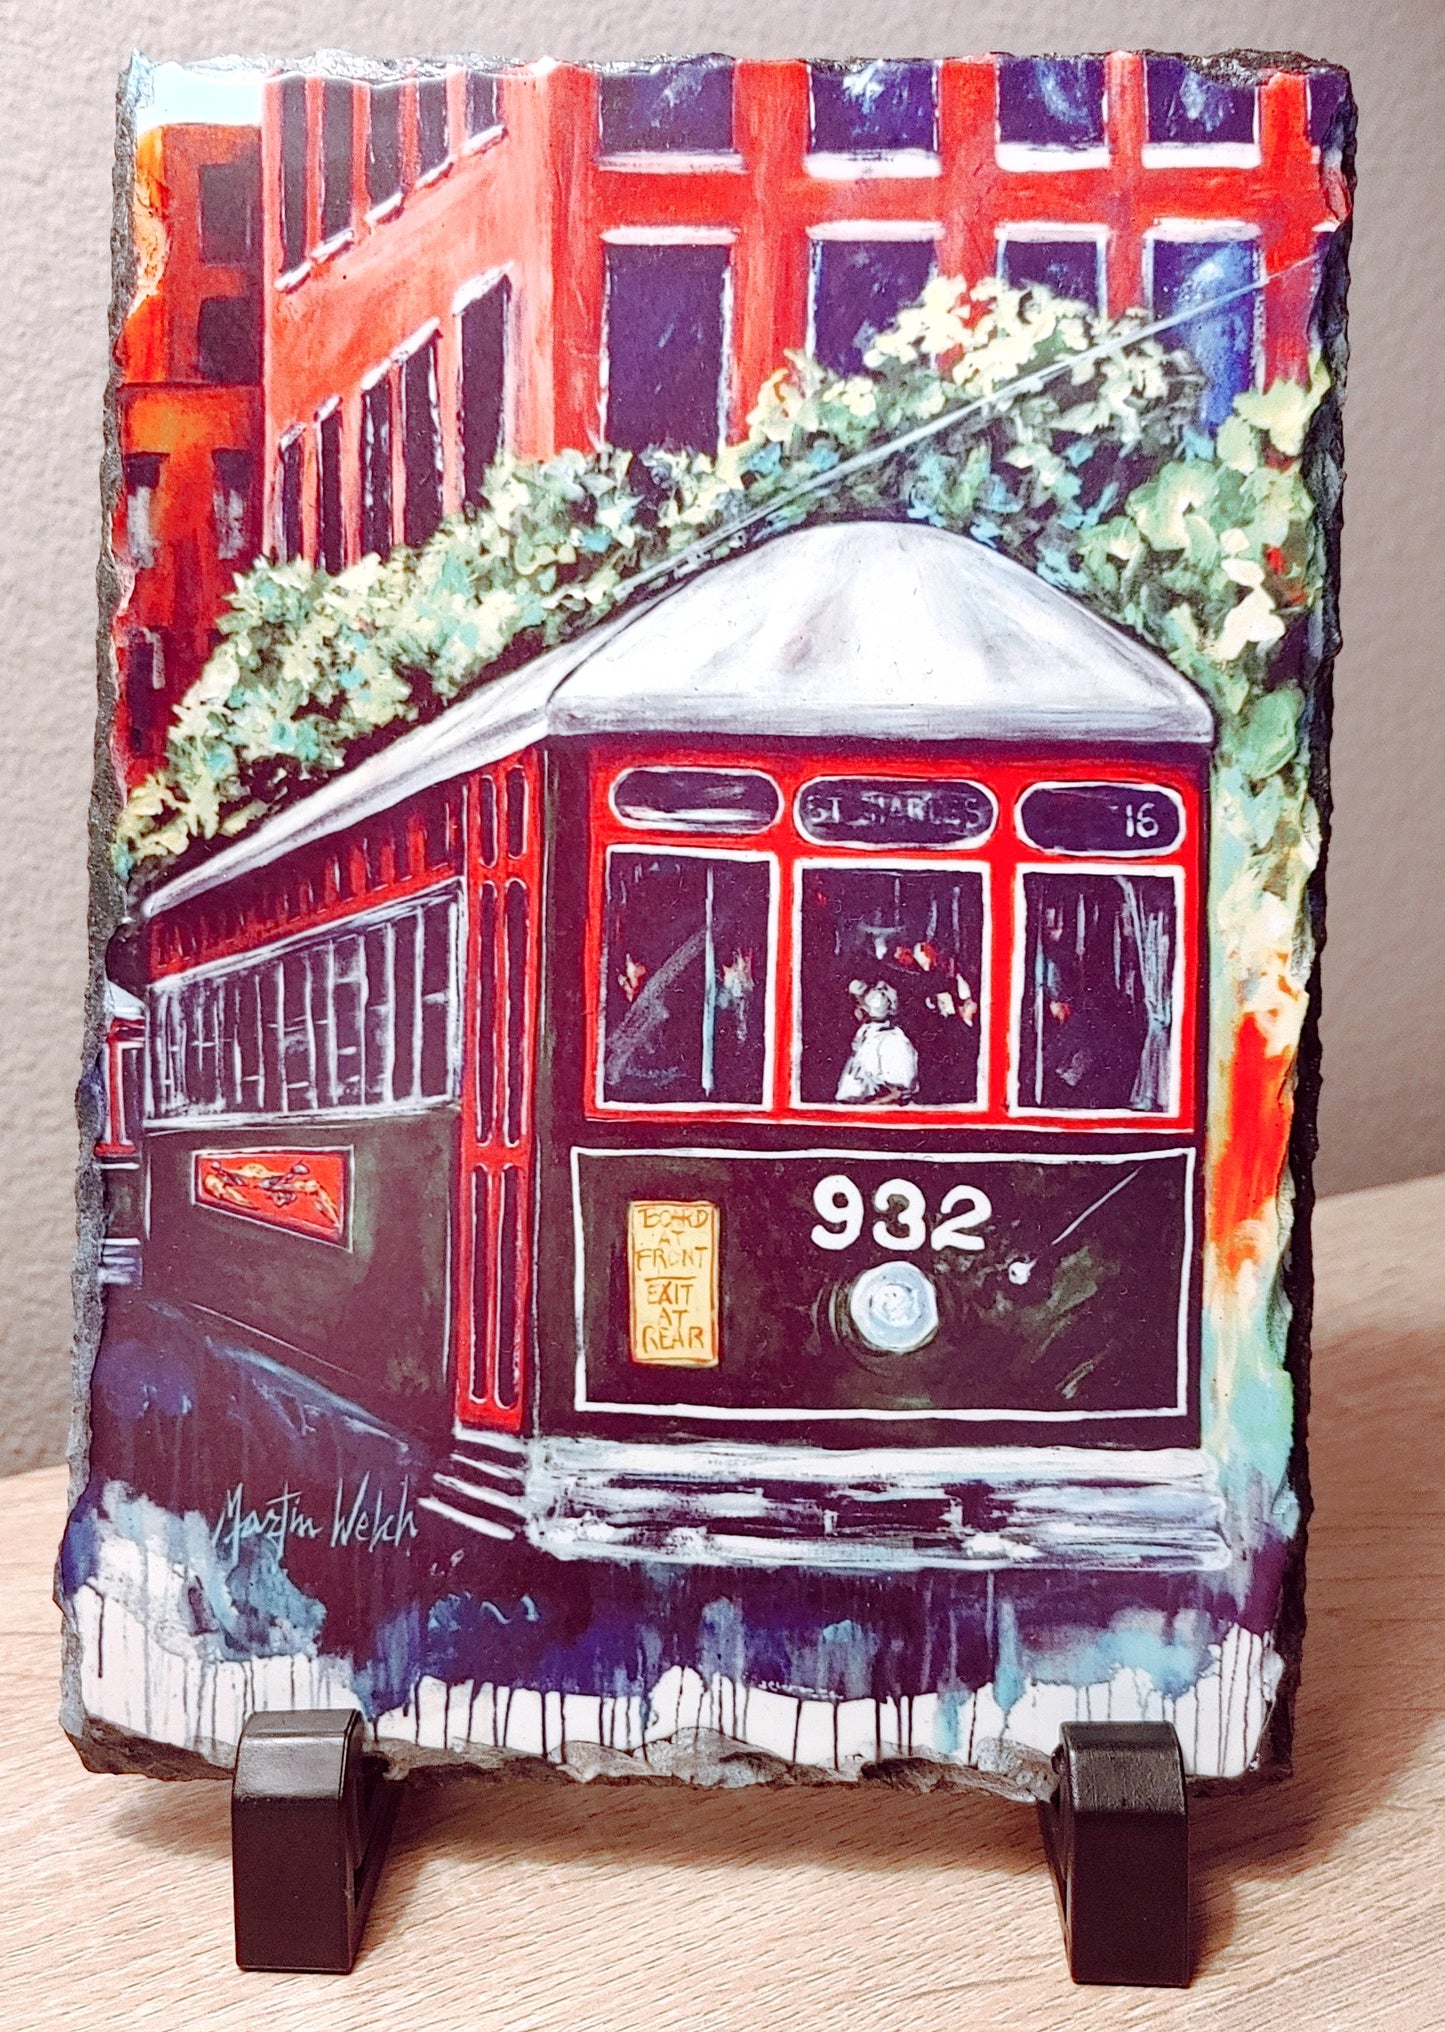 Streetcar No. 932 - 5.5x7.5 slate tile reproduction - New Orleans